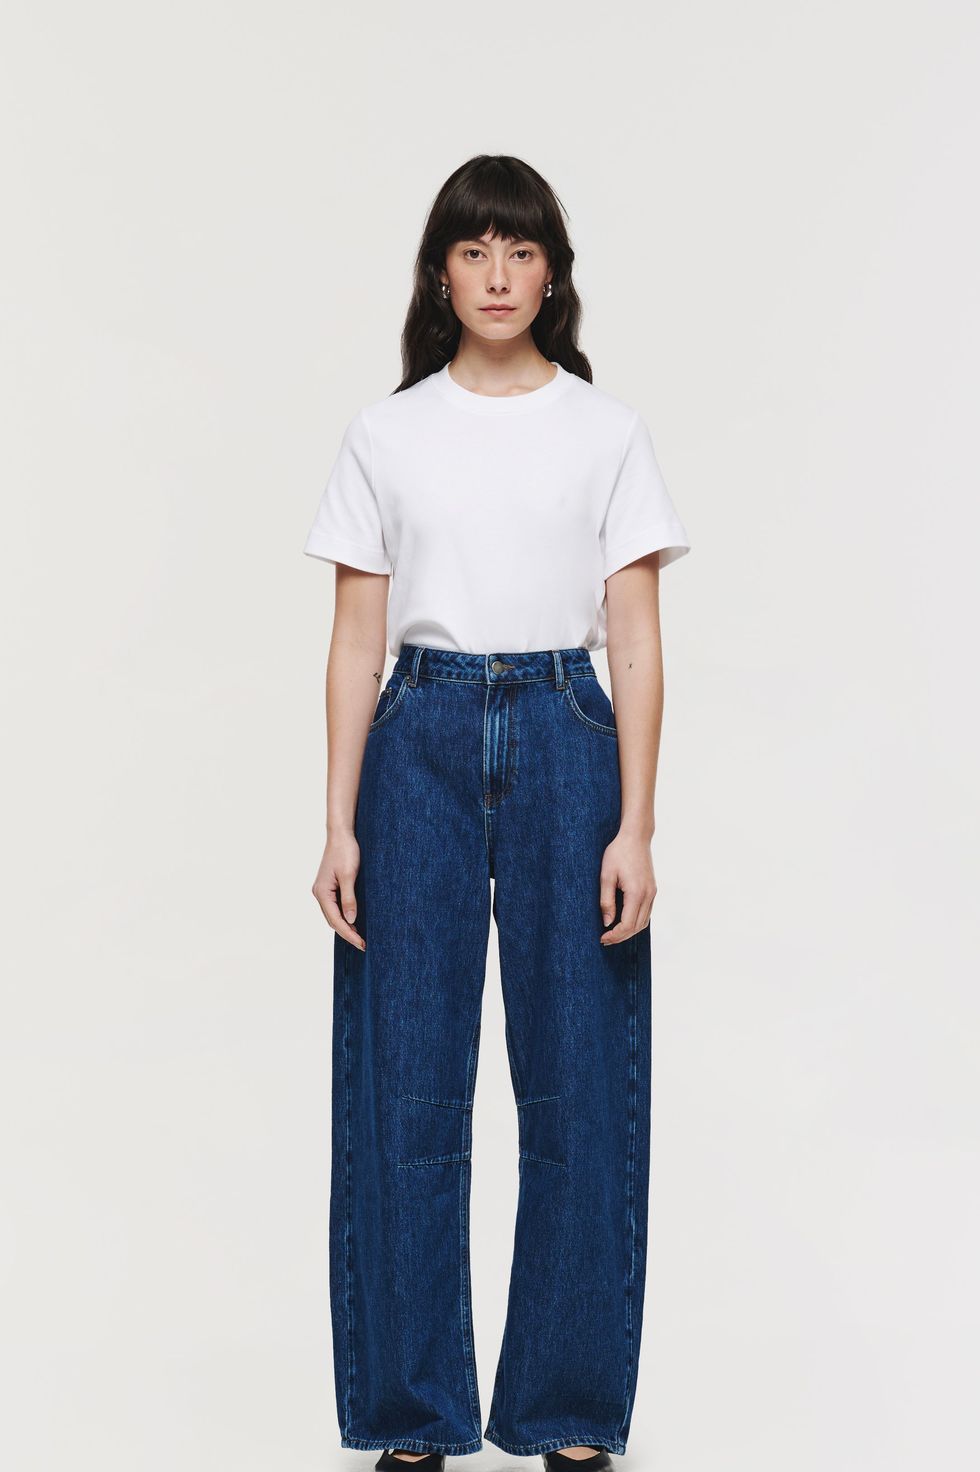 Barrel-Leg Jeans Are Officially The Denim Shape For 2024